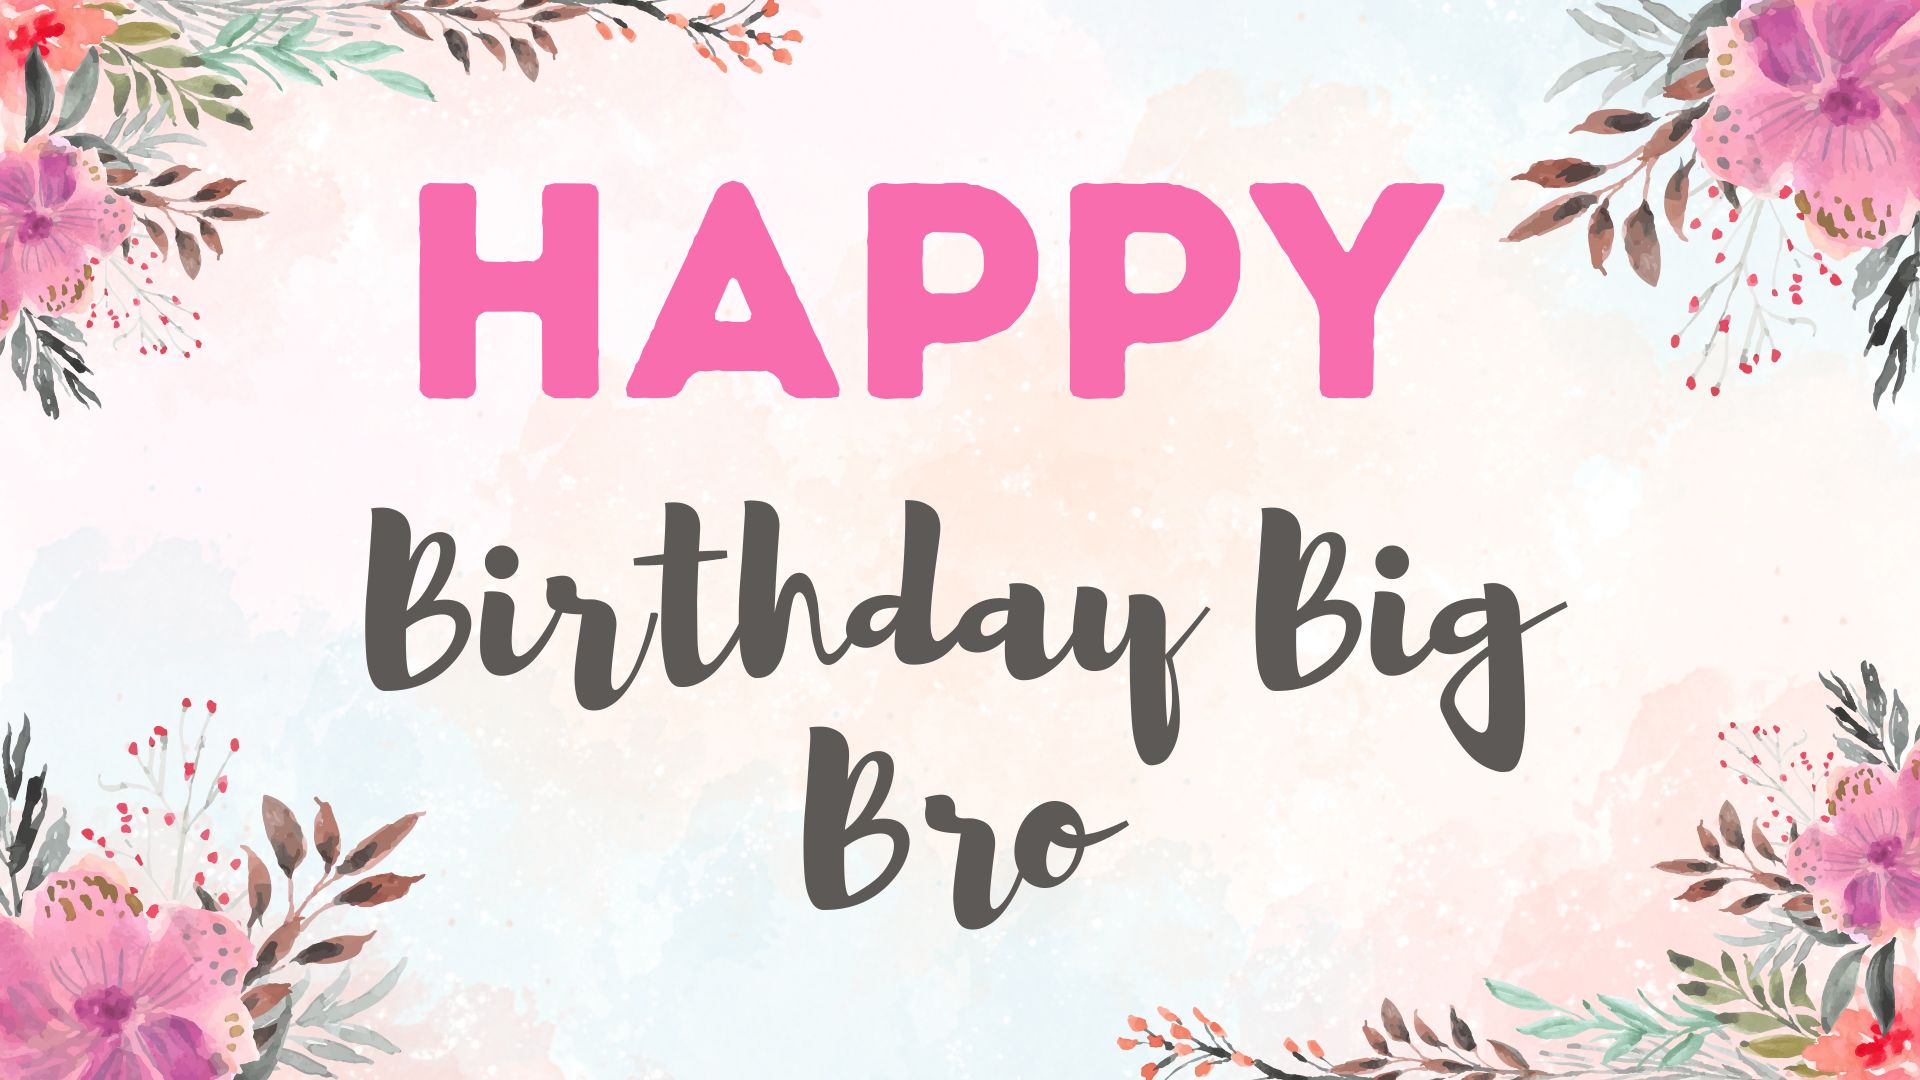 Simple birthday wishes for big brother